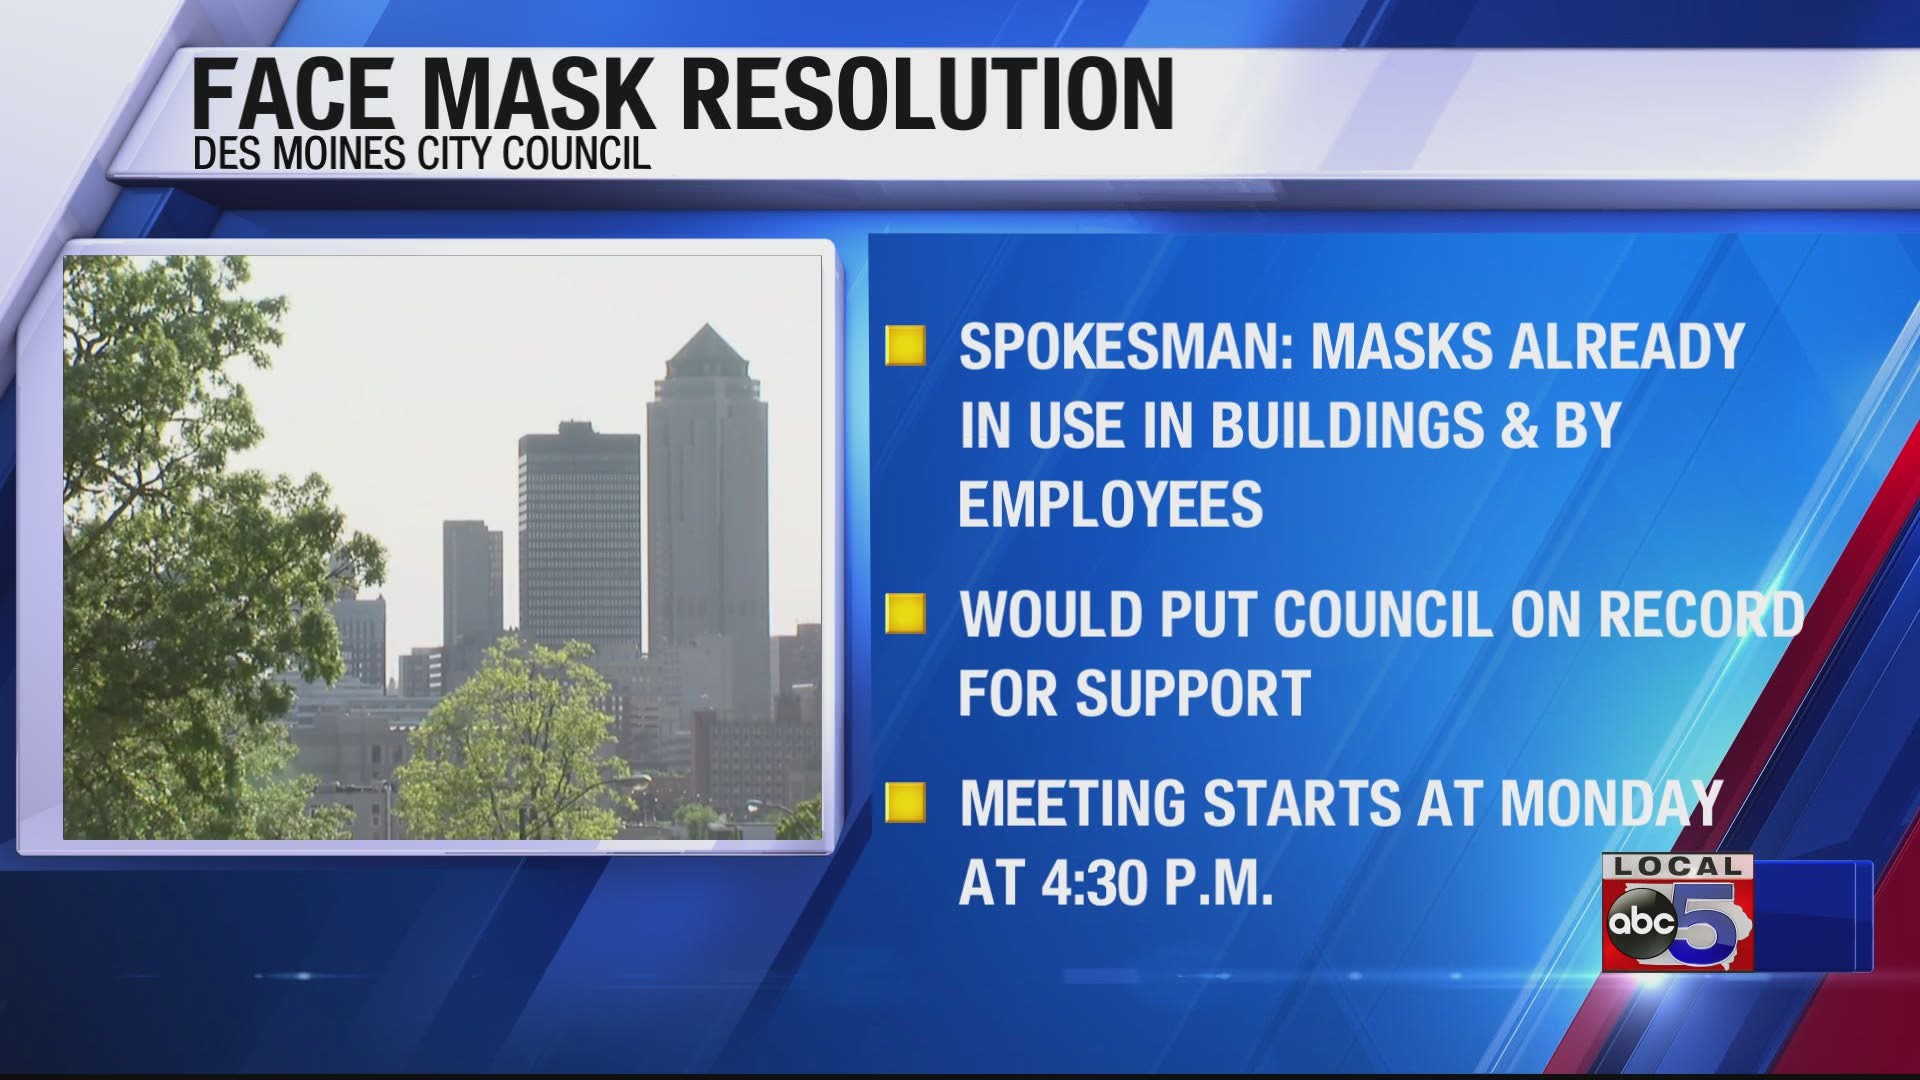 If passed, the resolution would require anyone visiting City buildings, and anyone employed by the City in any capacity, to wear a mask in public.